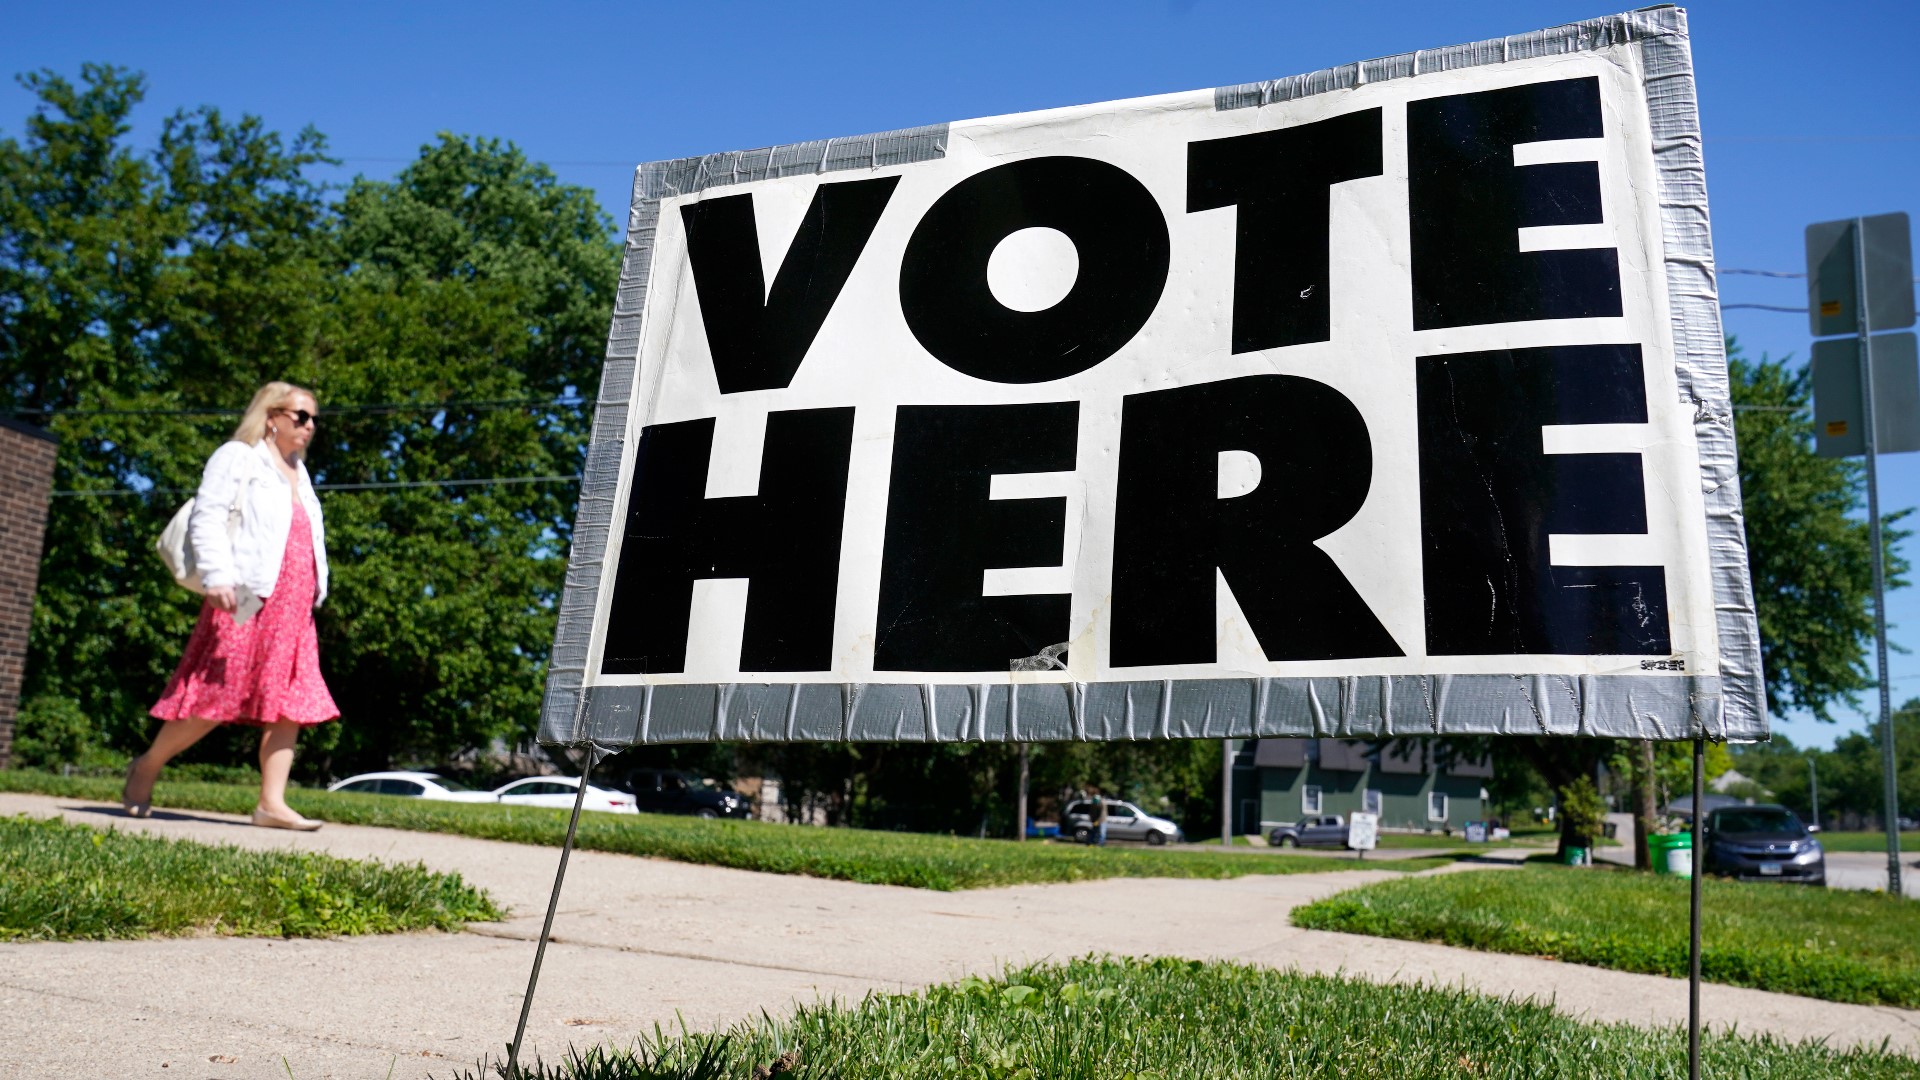 On Tuesday, June 7, Iowans will take to the polls to vote in the primary election. Here’s what voters need to know before casting their ballots.